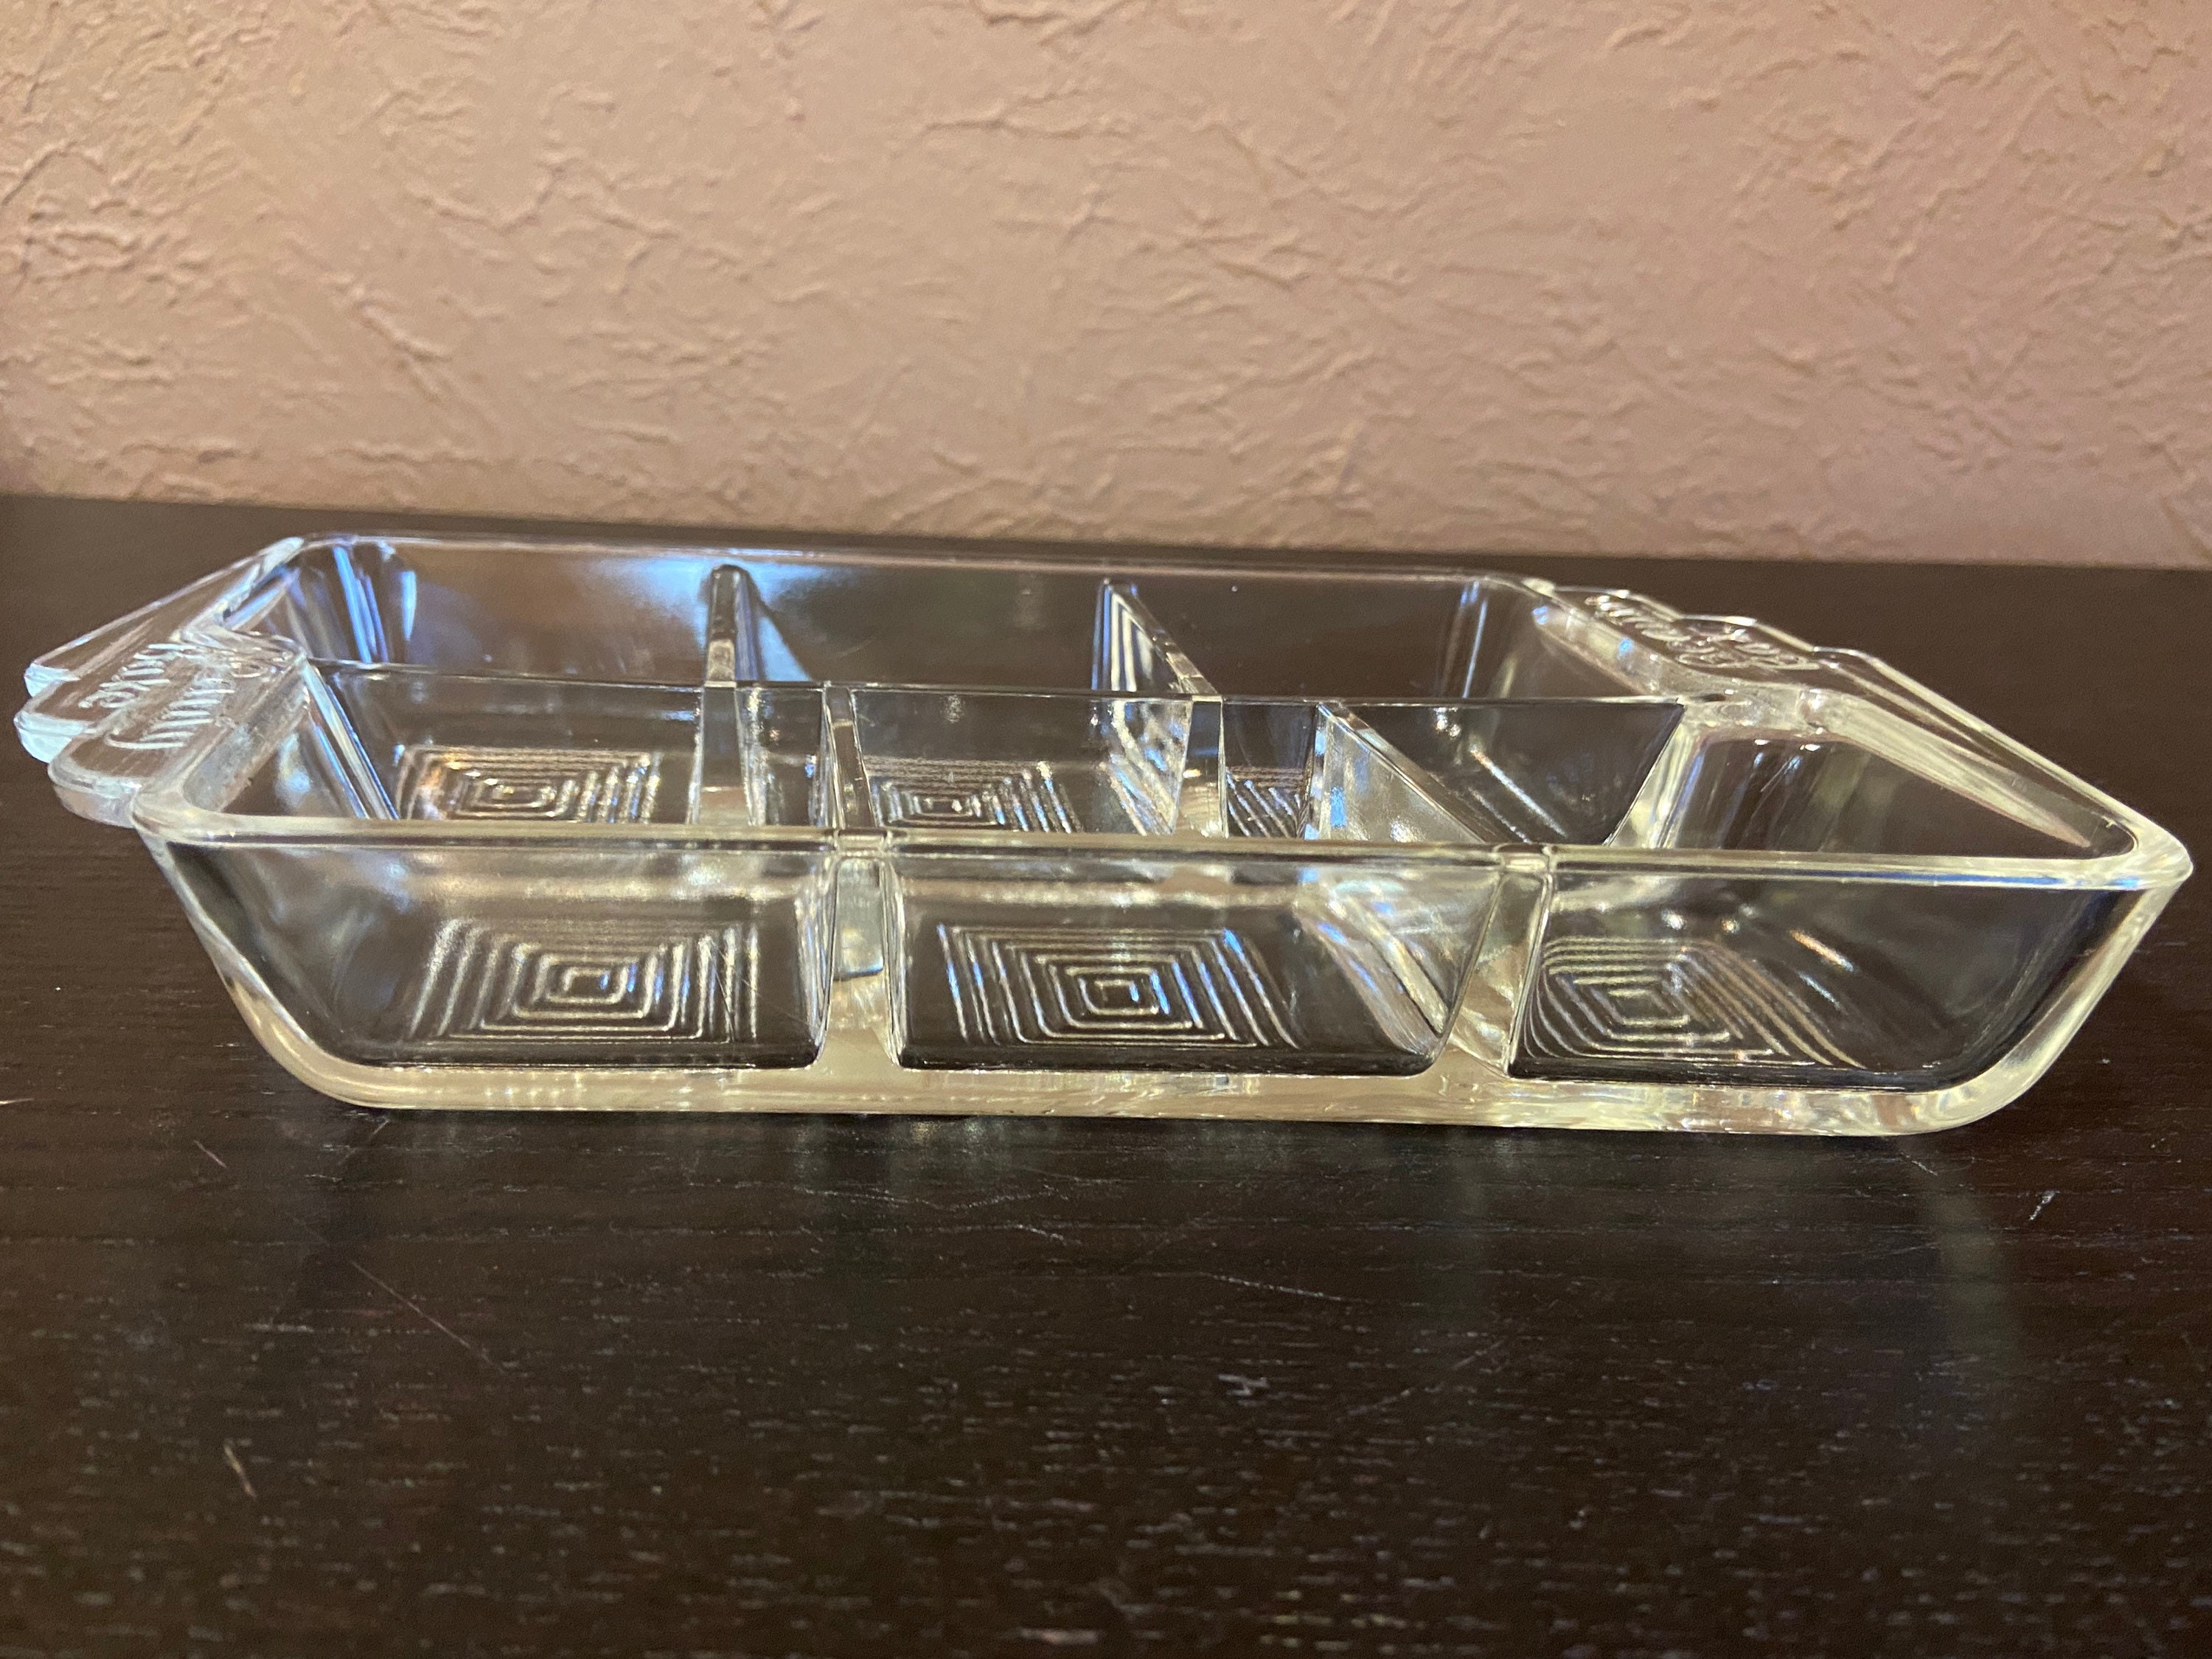 Vintage 1950s Beauty Bake Clear Glass Baking Pan -- Diamond-shaped Muffins  or Cornbread MCM Style. 2 Available. Sold Separately.